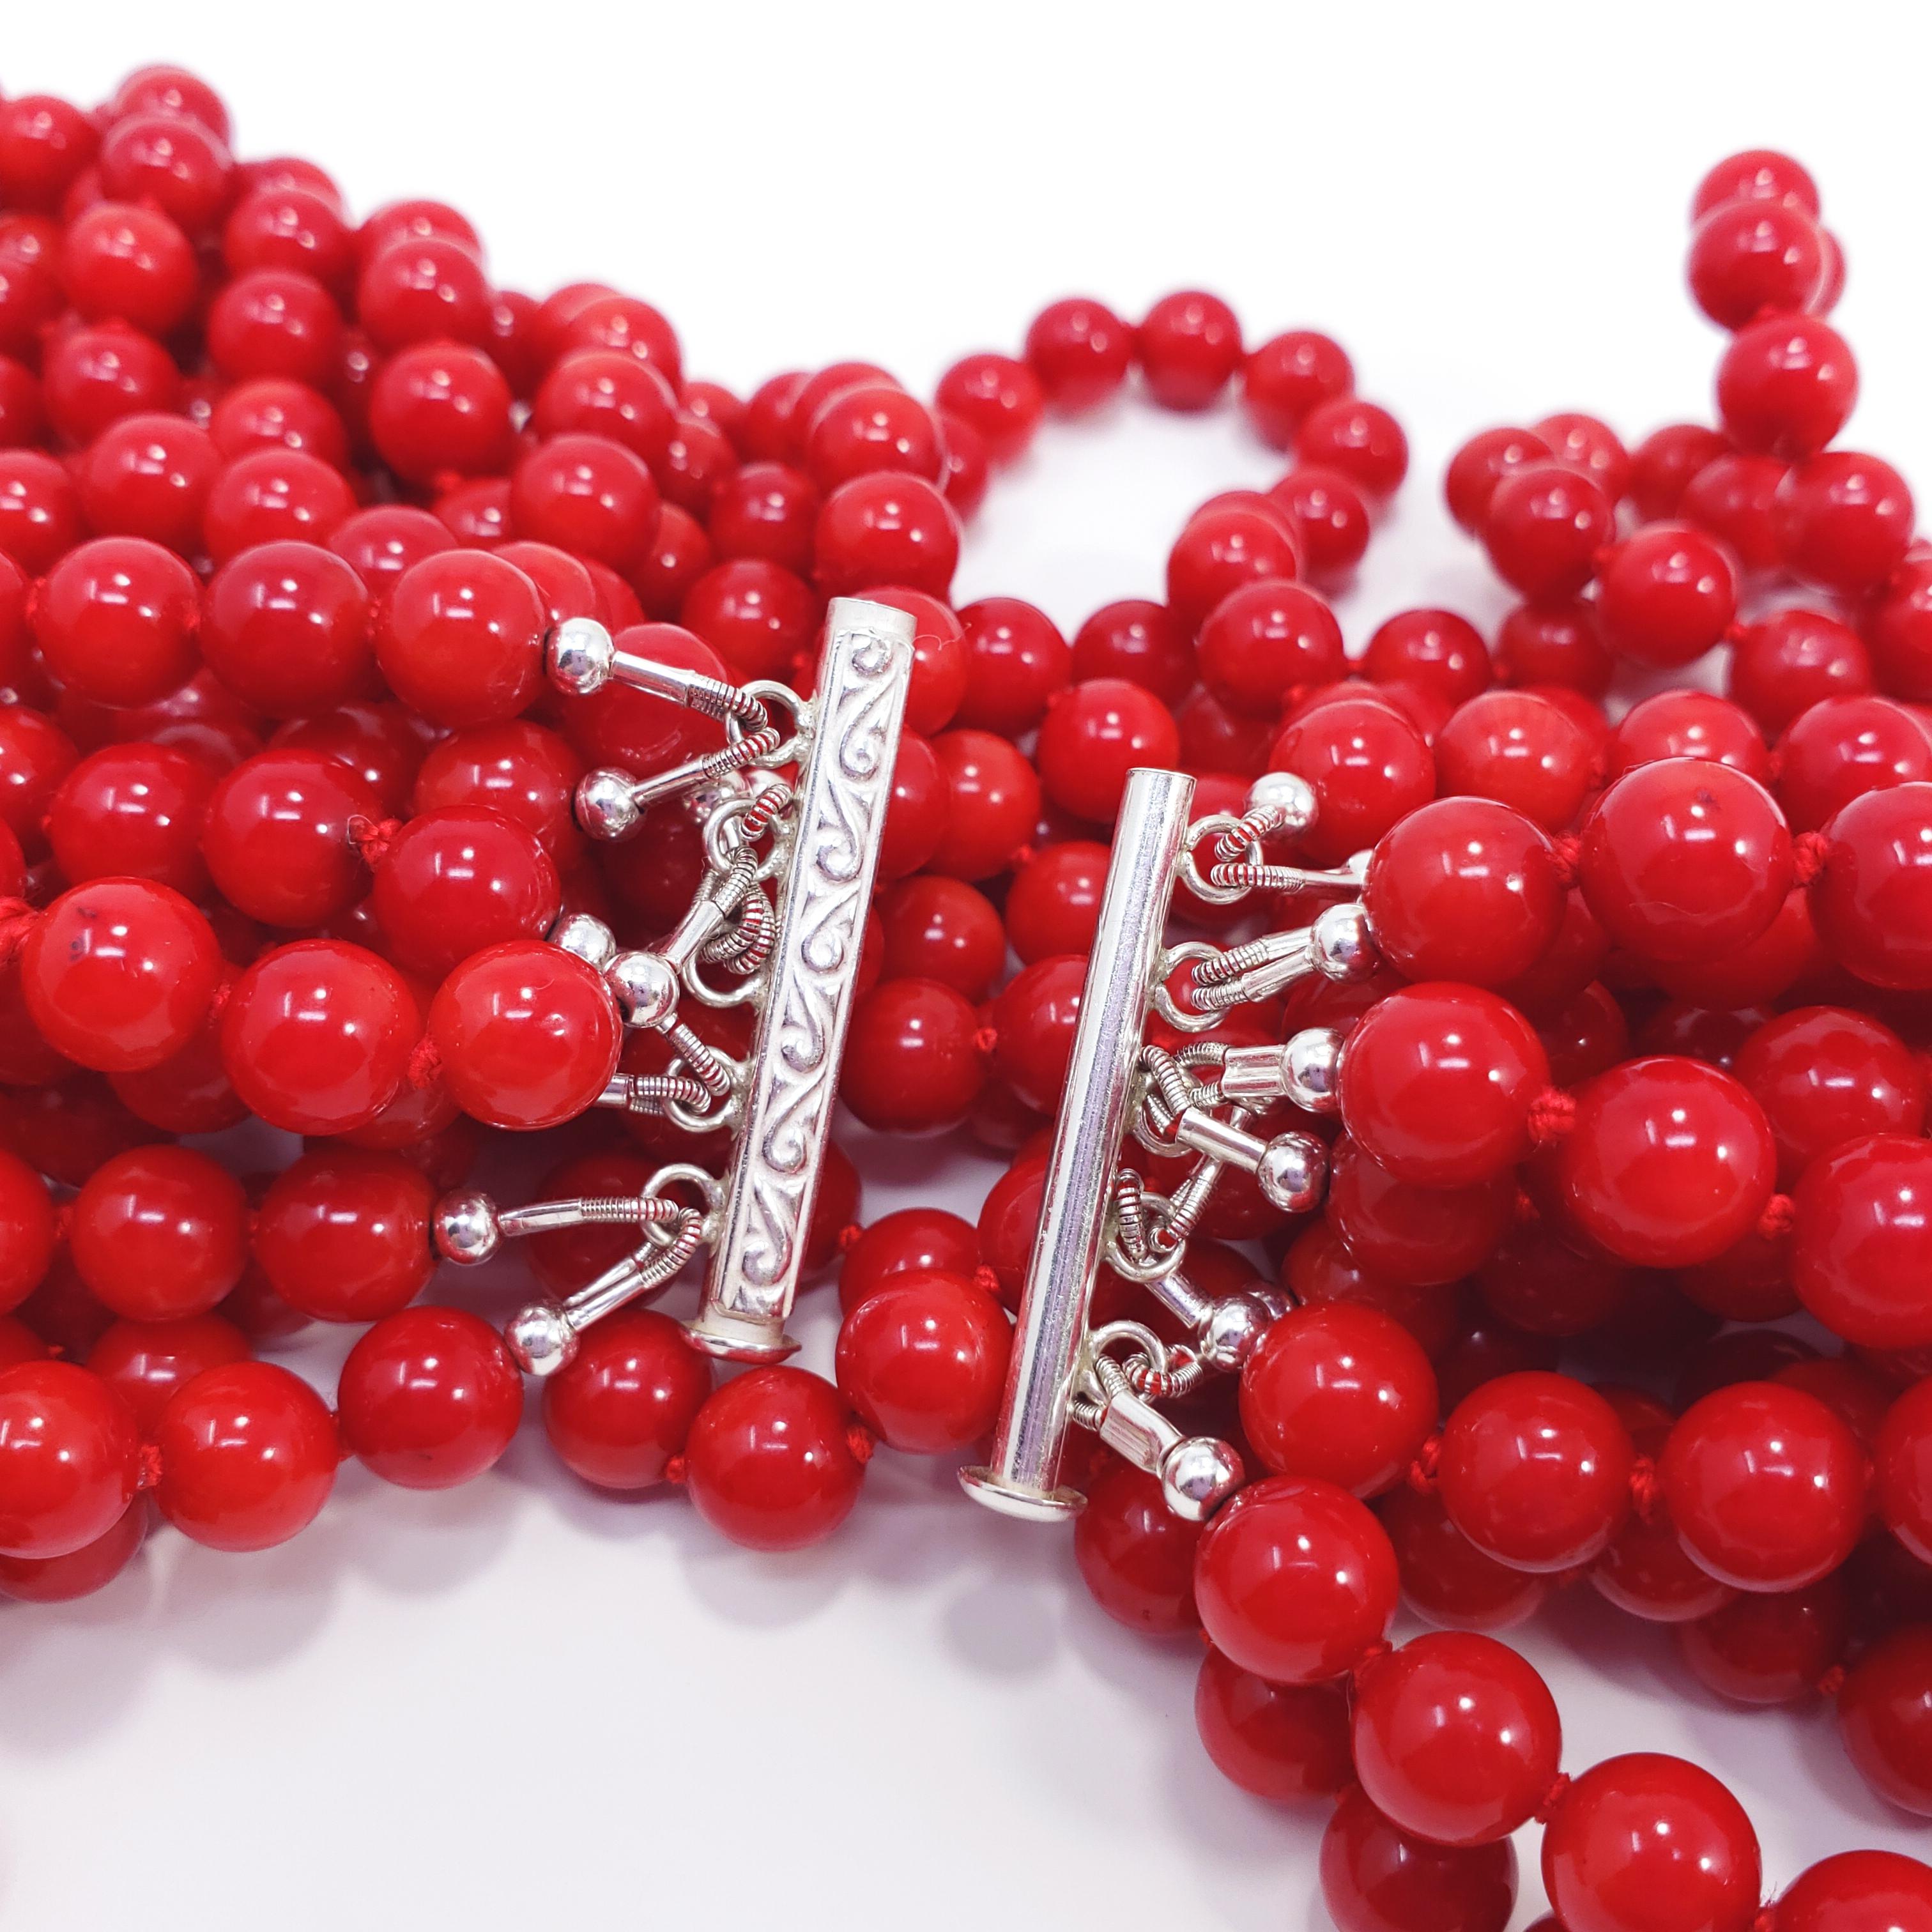 10 Strand Genuine Red Coral 7mm Bead Necklace with Sterling Silver Sliding Clasp 1